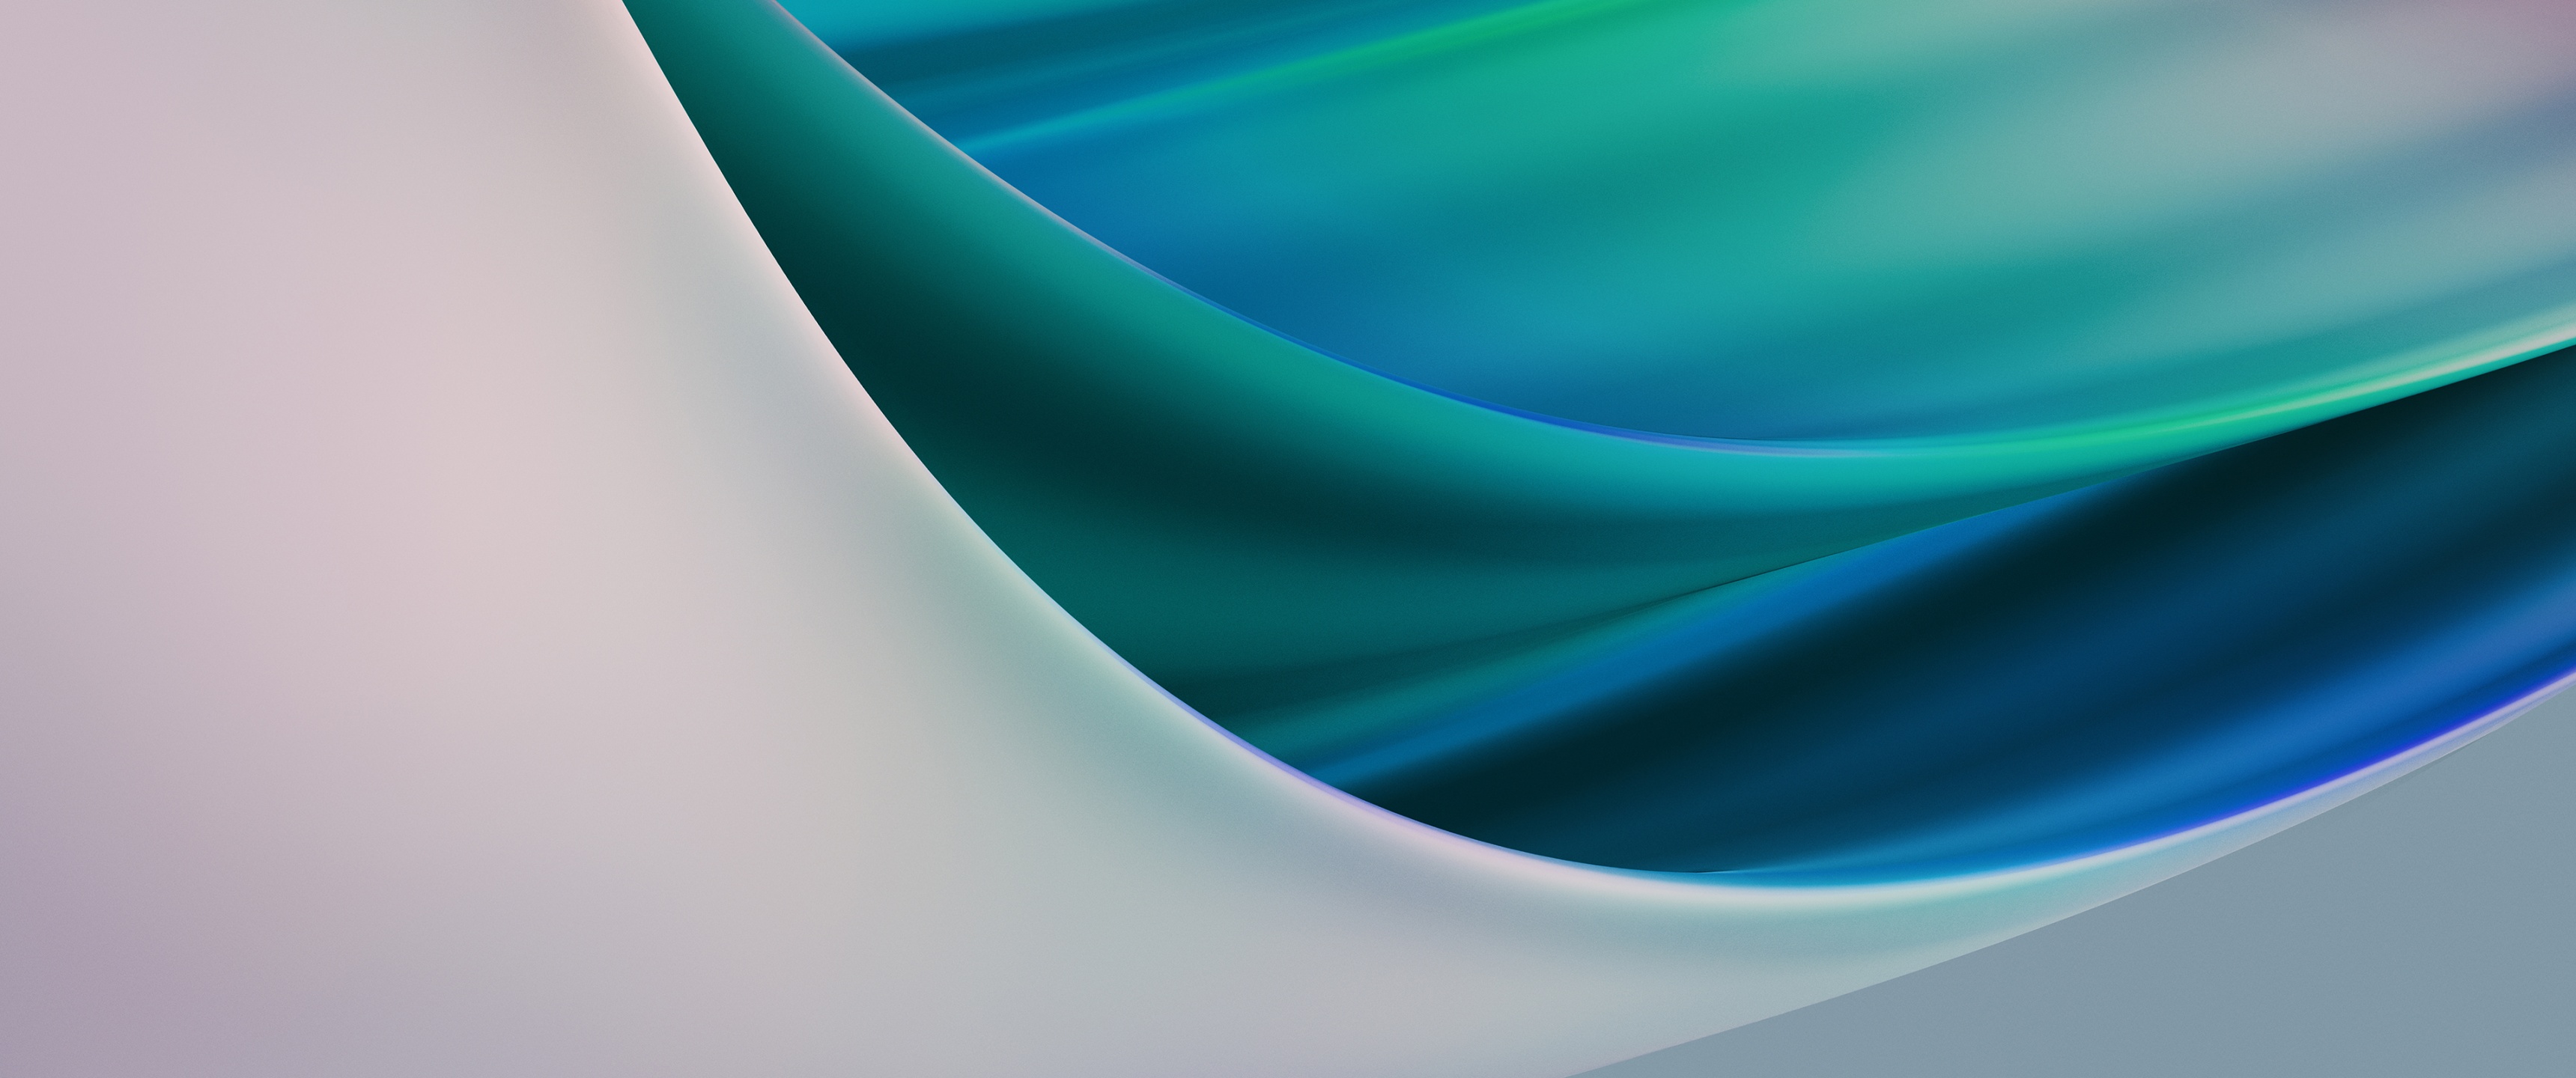 Waves Wallpaper 4K, Fluidic, Teal, Abstract, #3800